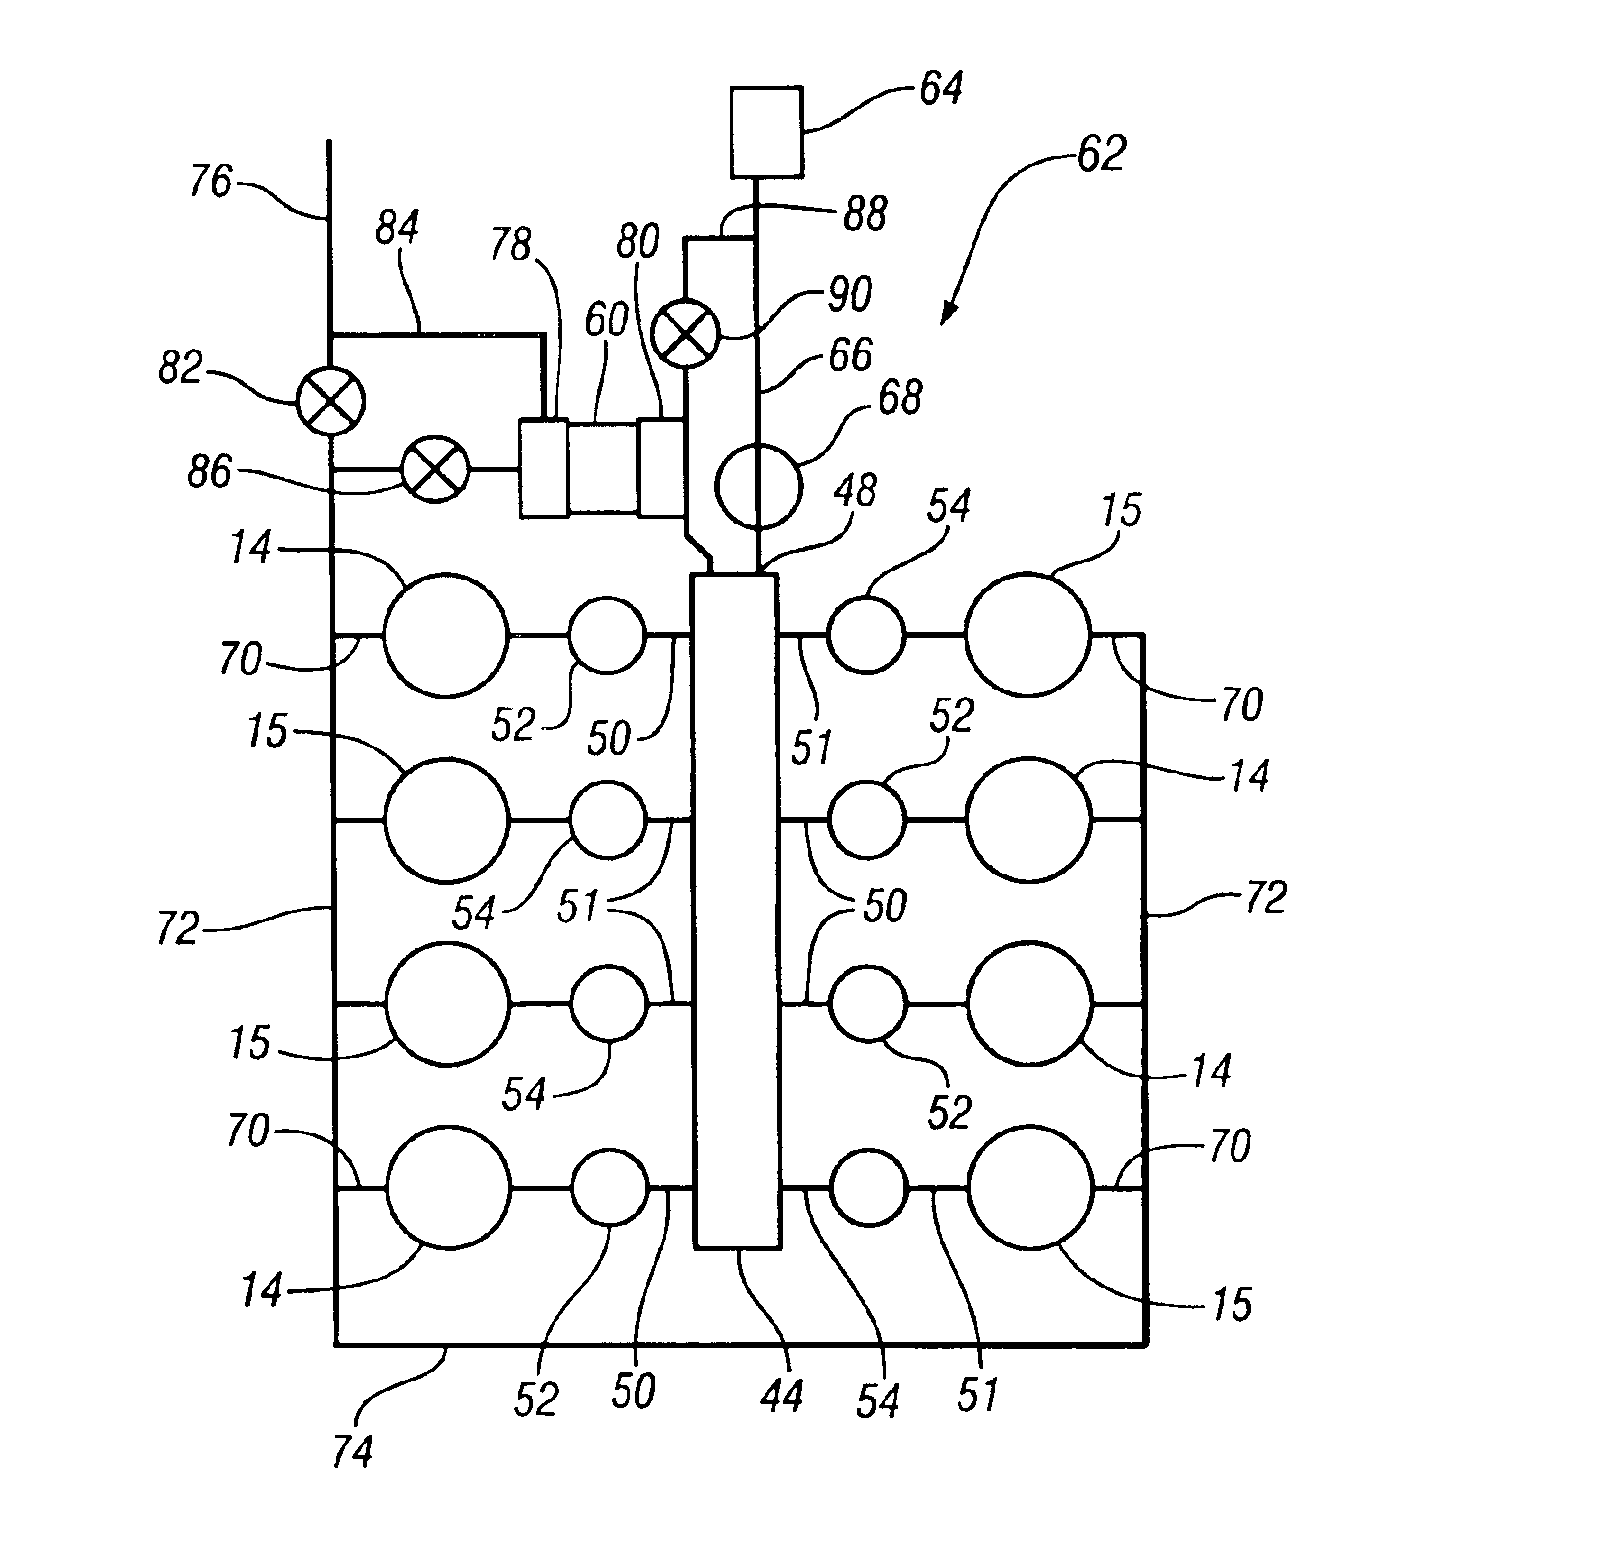 Engine and method of operation with cylinder deactivation